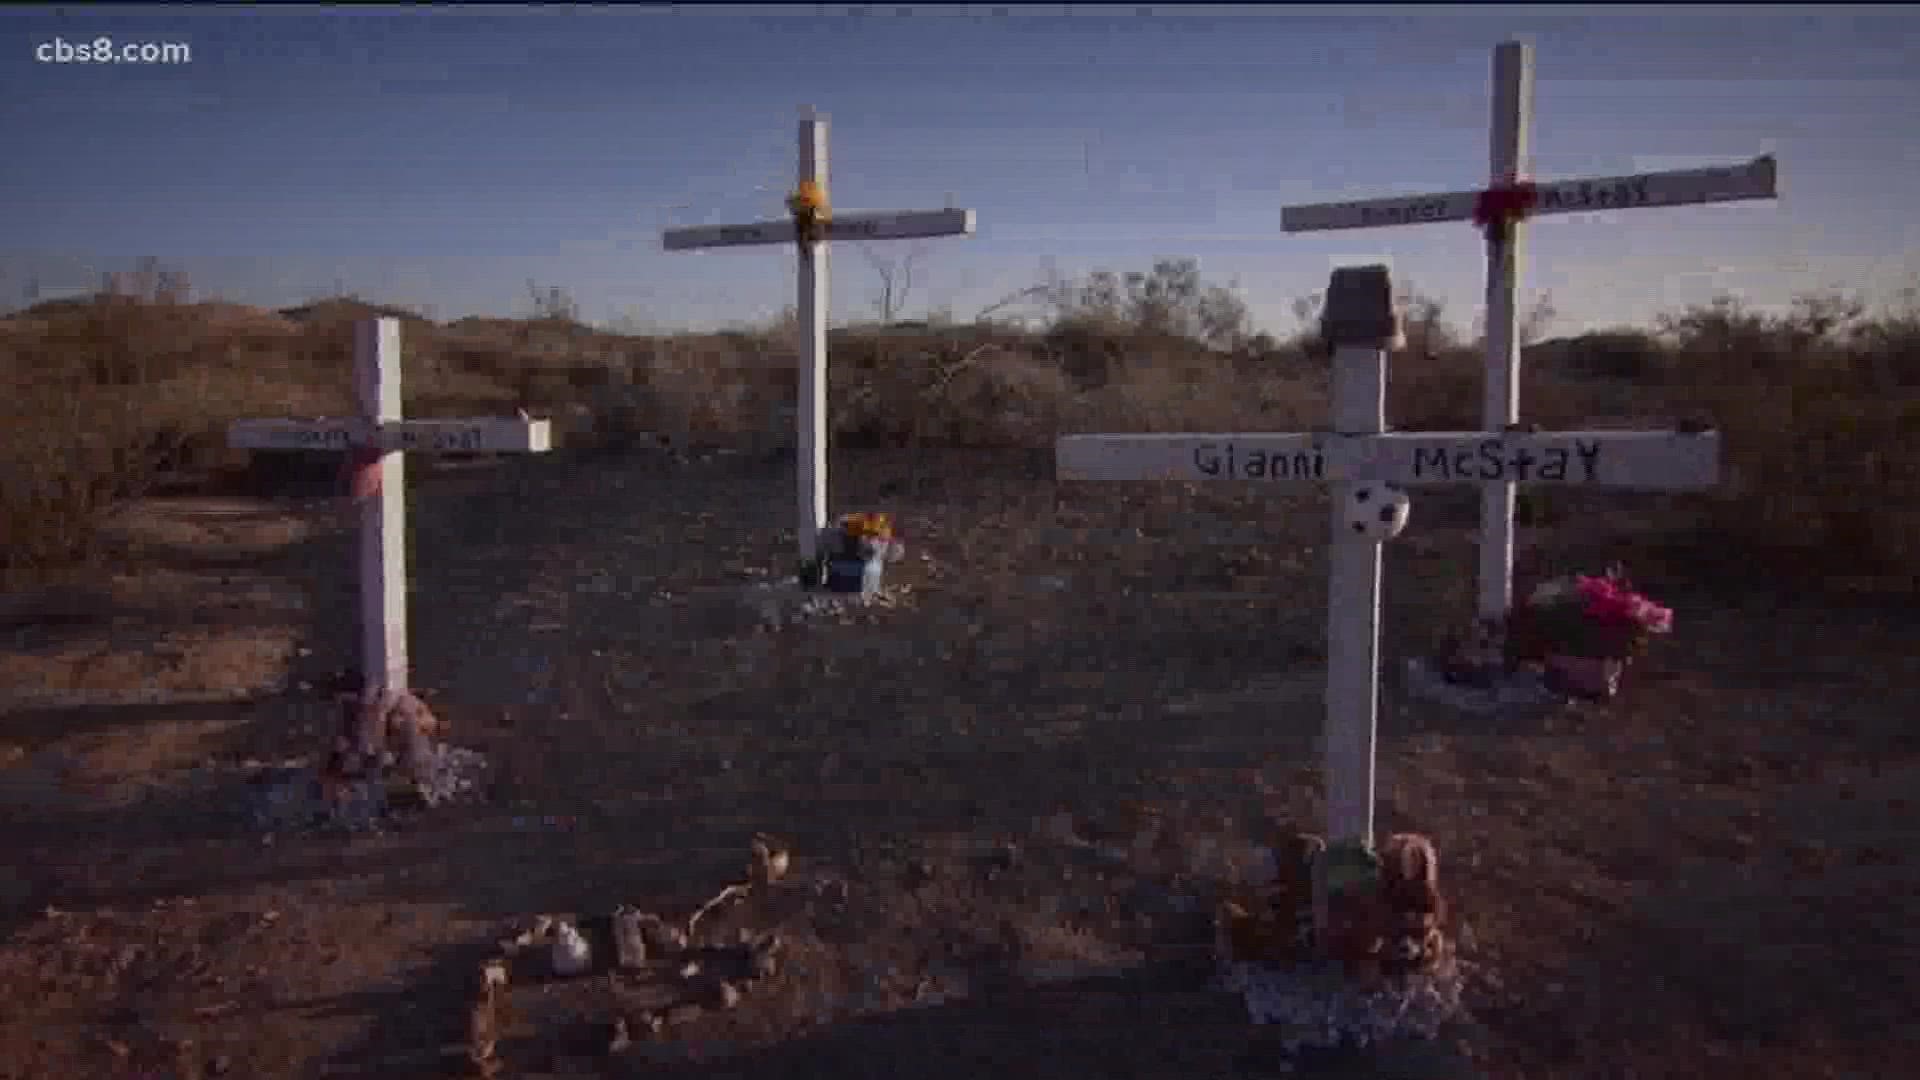 A New York Times best selling author will write about the disappearance and murders of Joseph and Summer McStay and their two young boys in 2010.